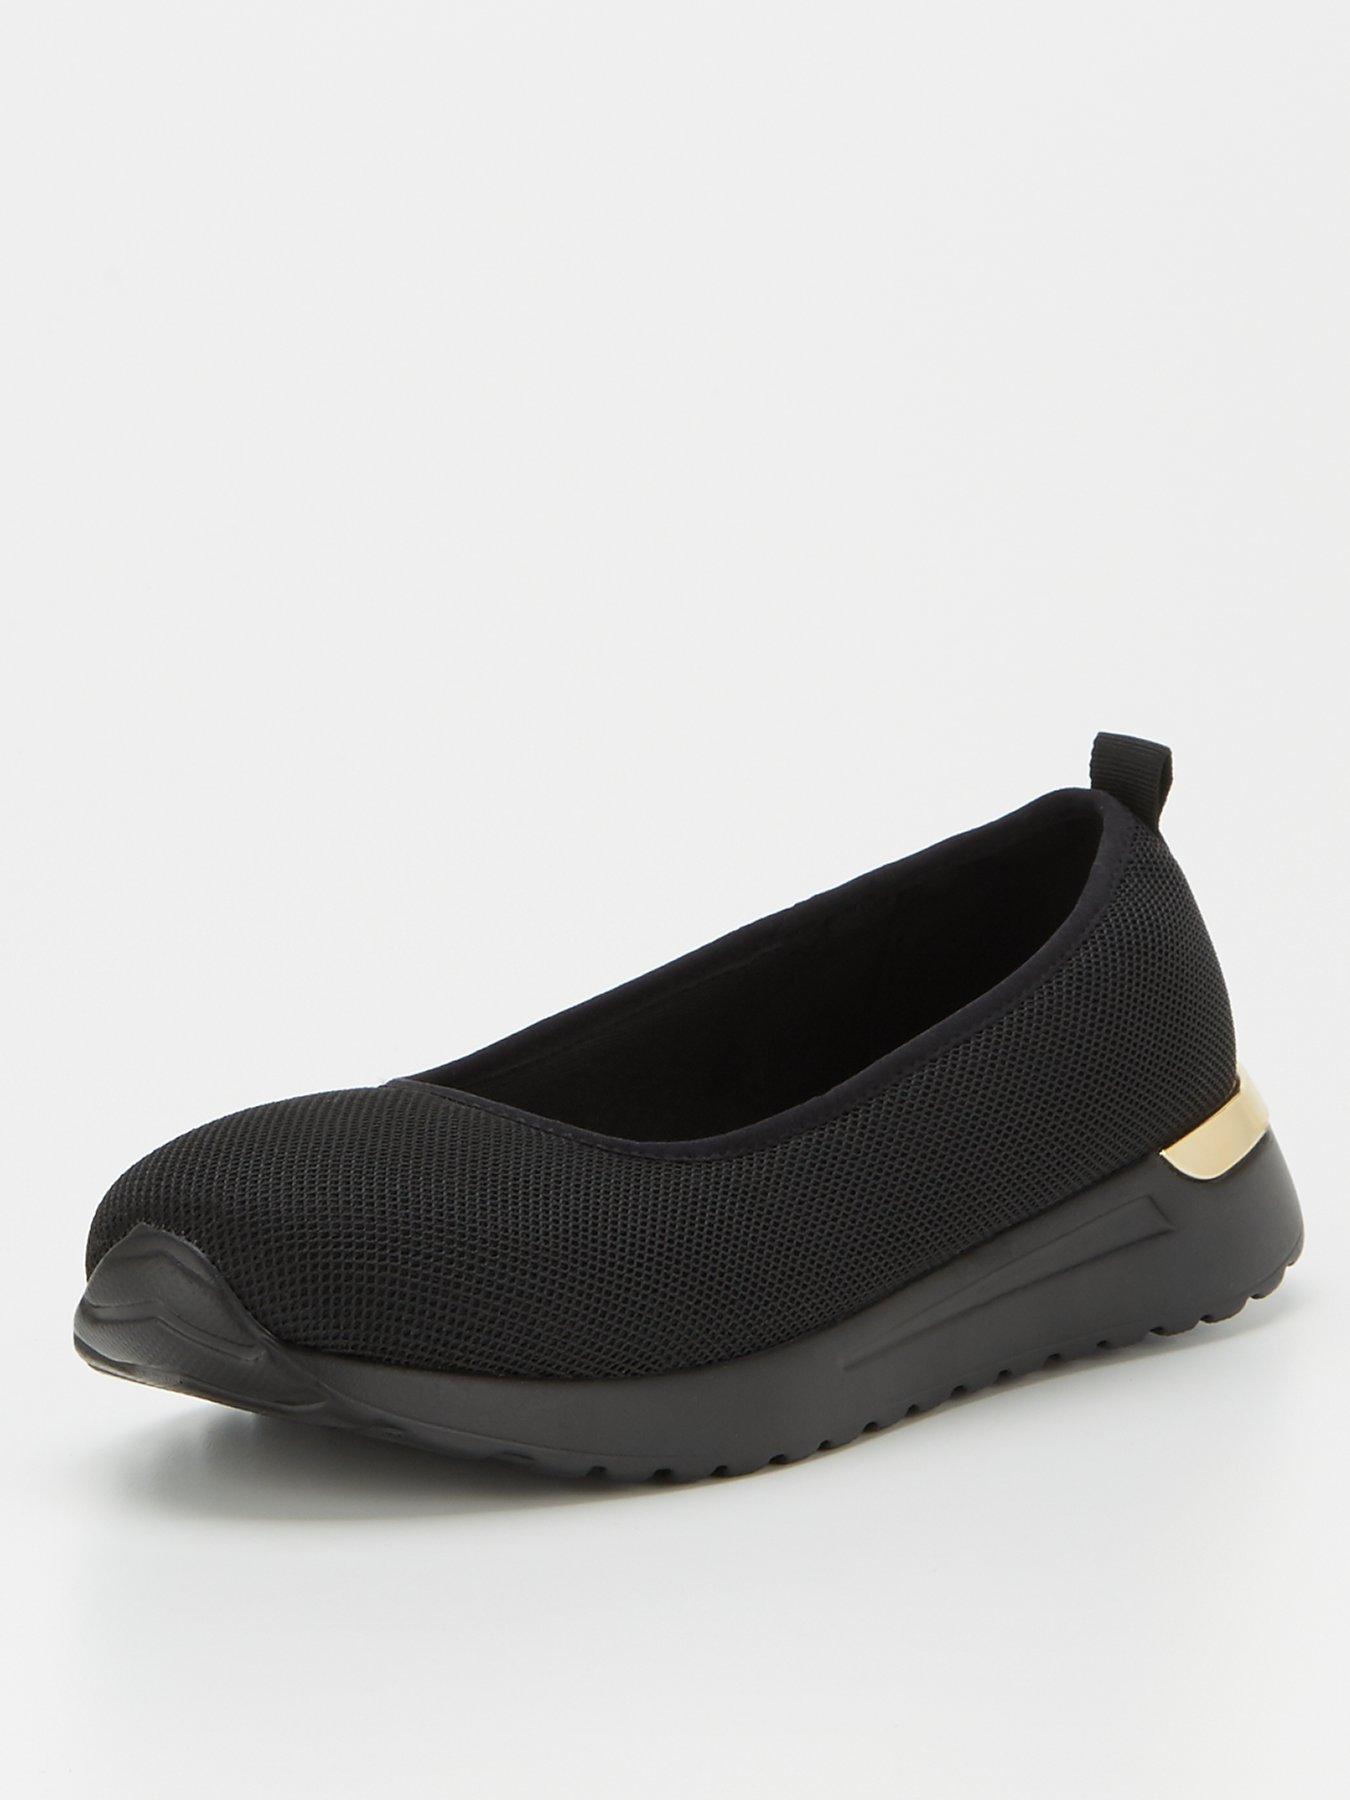 Shoes & boots Nello Knitted Slip On Ballerina - Black